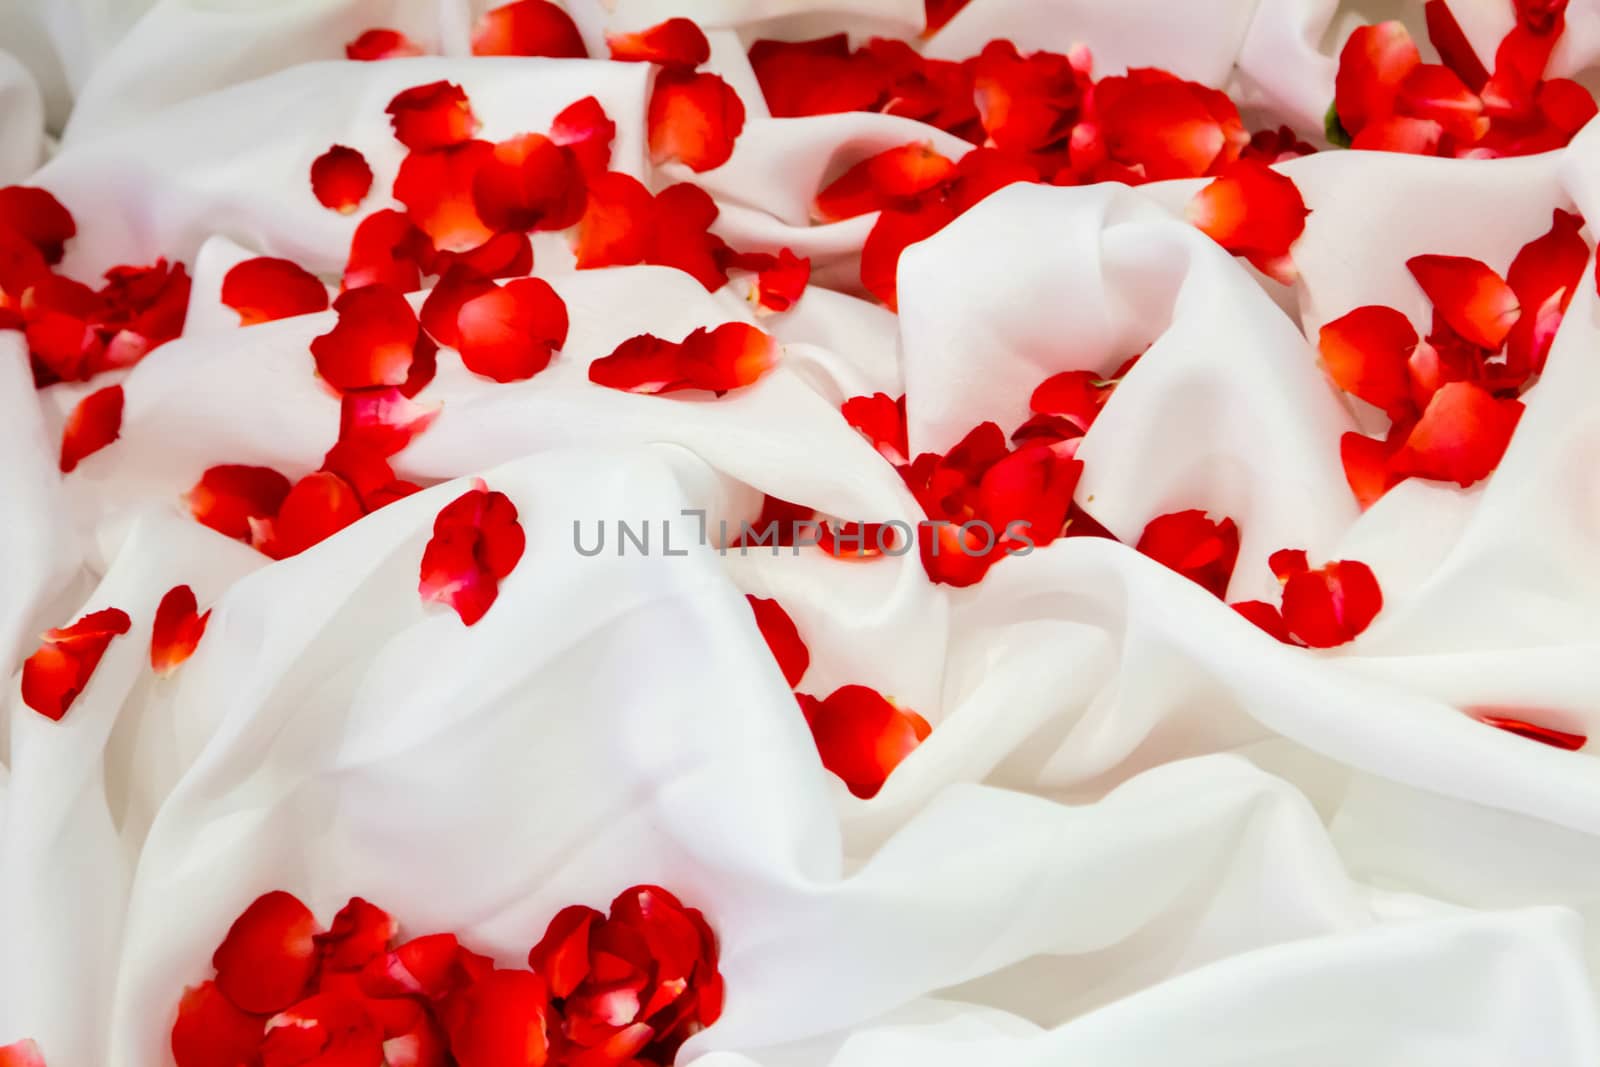 Rose petals on white fabric with background